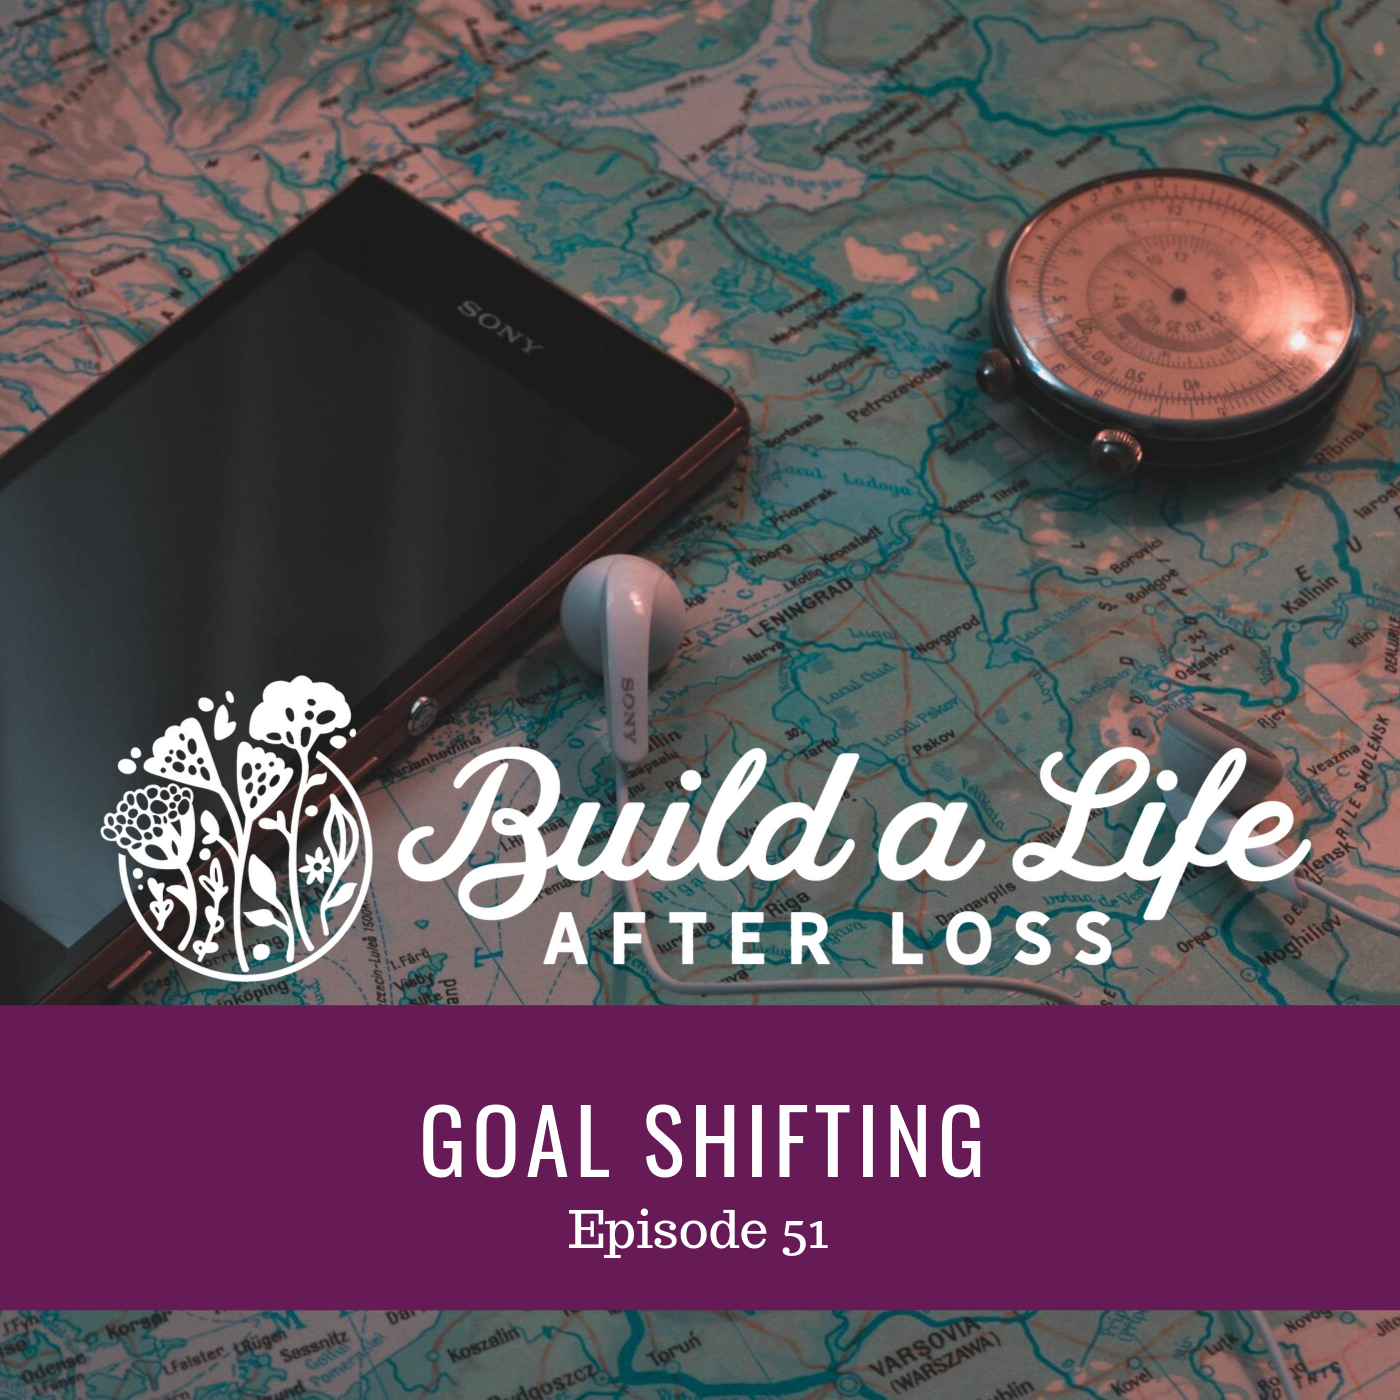 Build a Life After Loss Podcast Julie Cluff episode 51, Goal shifting